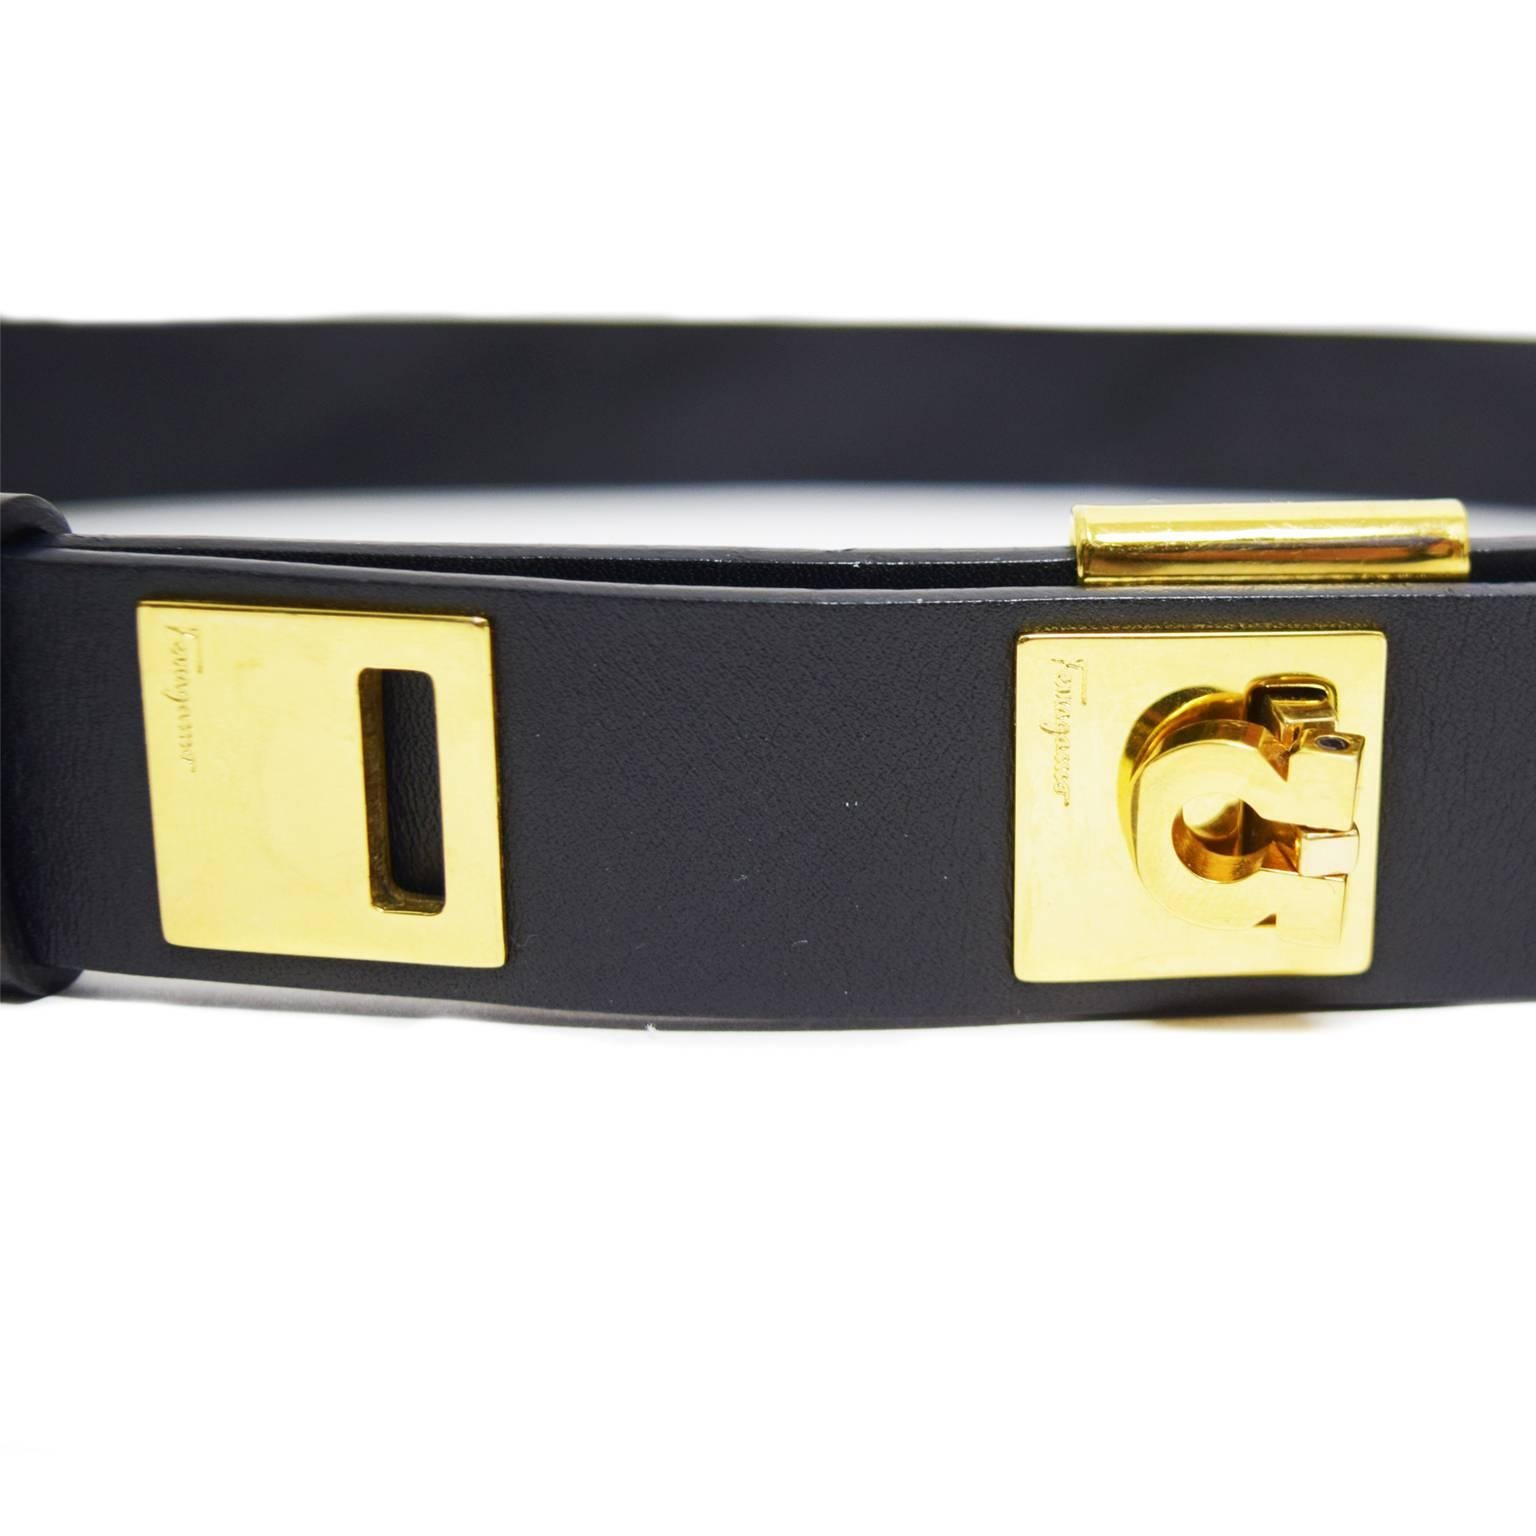 This belt by Salvatore Ferragamo is made of black Italian leather and has gold bucked hardware with engraved logo. The buckle is a magnetic mechanical lock that snaps in between each space. 